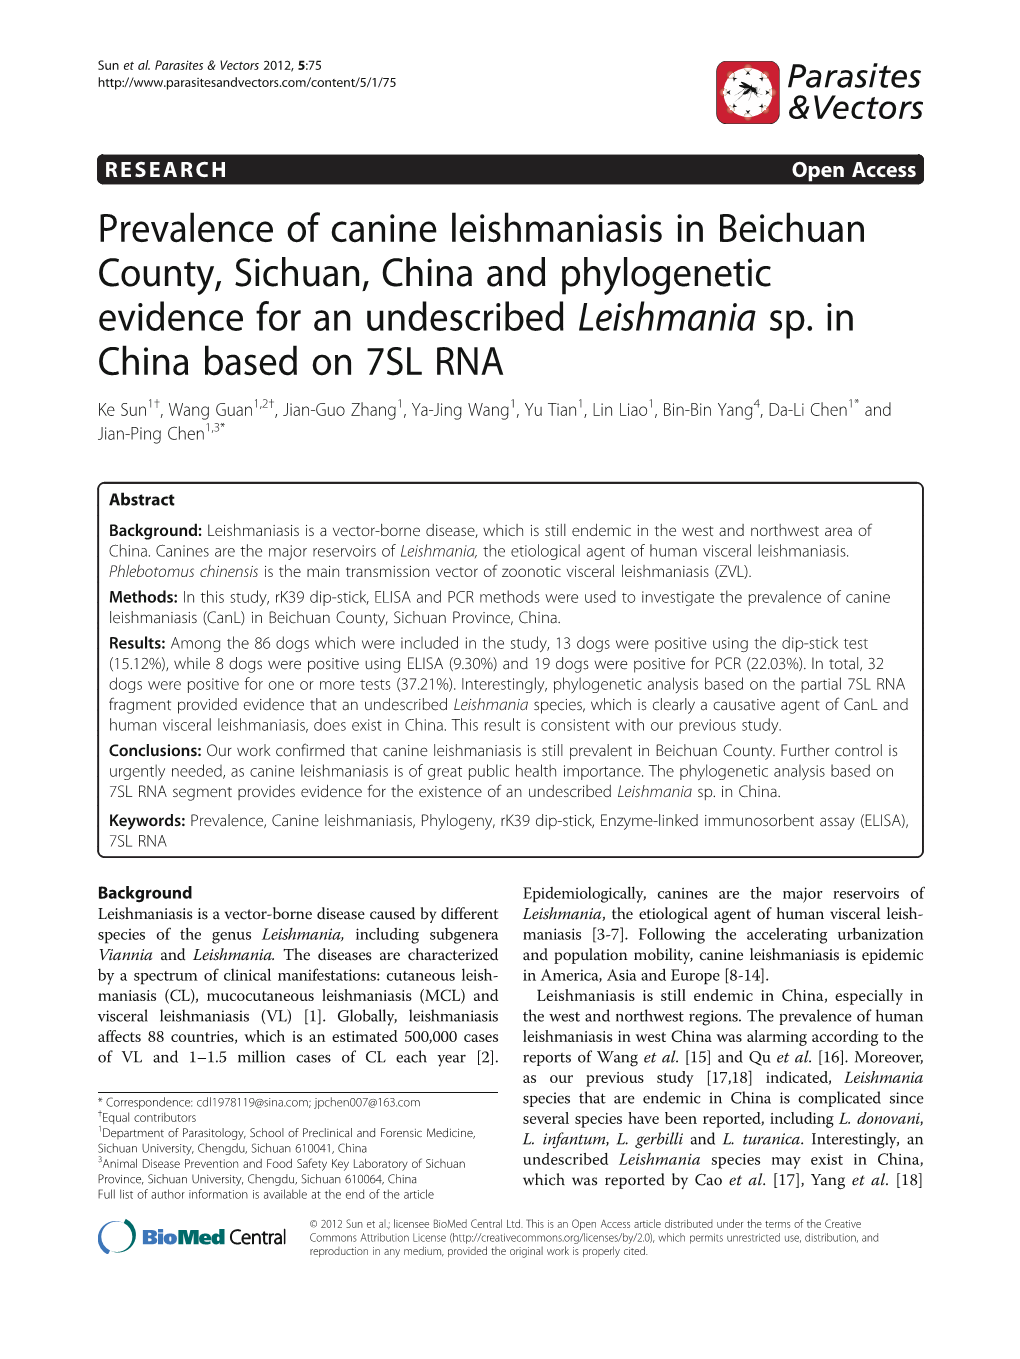 Prevalence of Canine Leishmaniasis in Beichuan County, Sichuan, China and Phylogenetic Evidence for an Undescribed Leishmania Sp